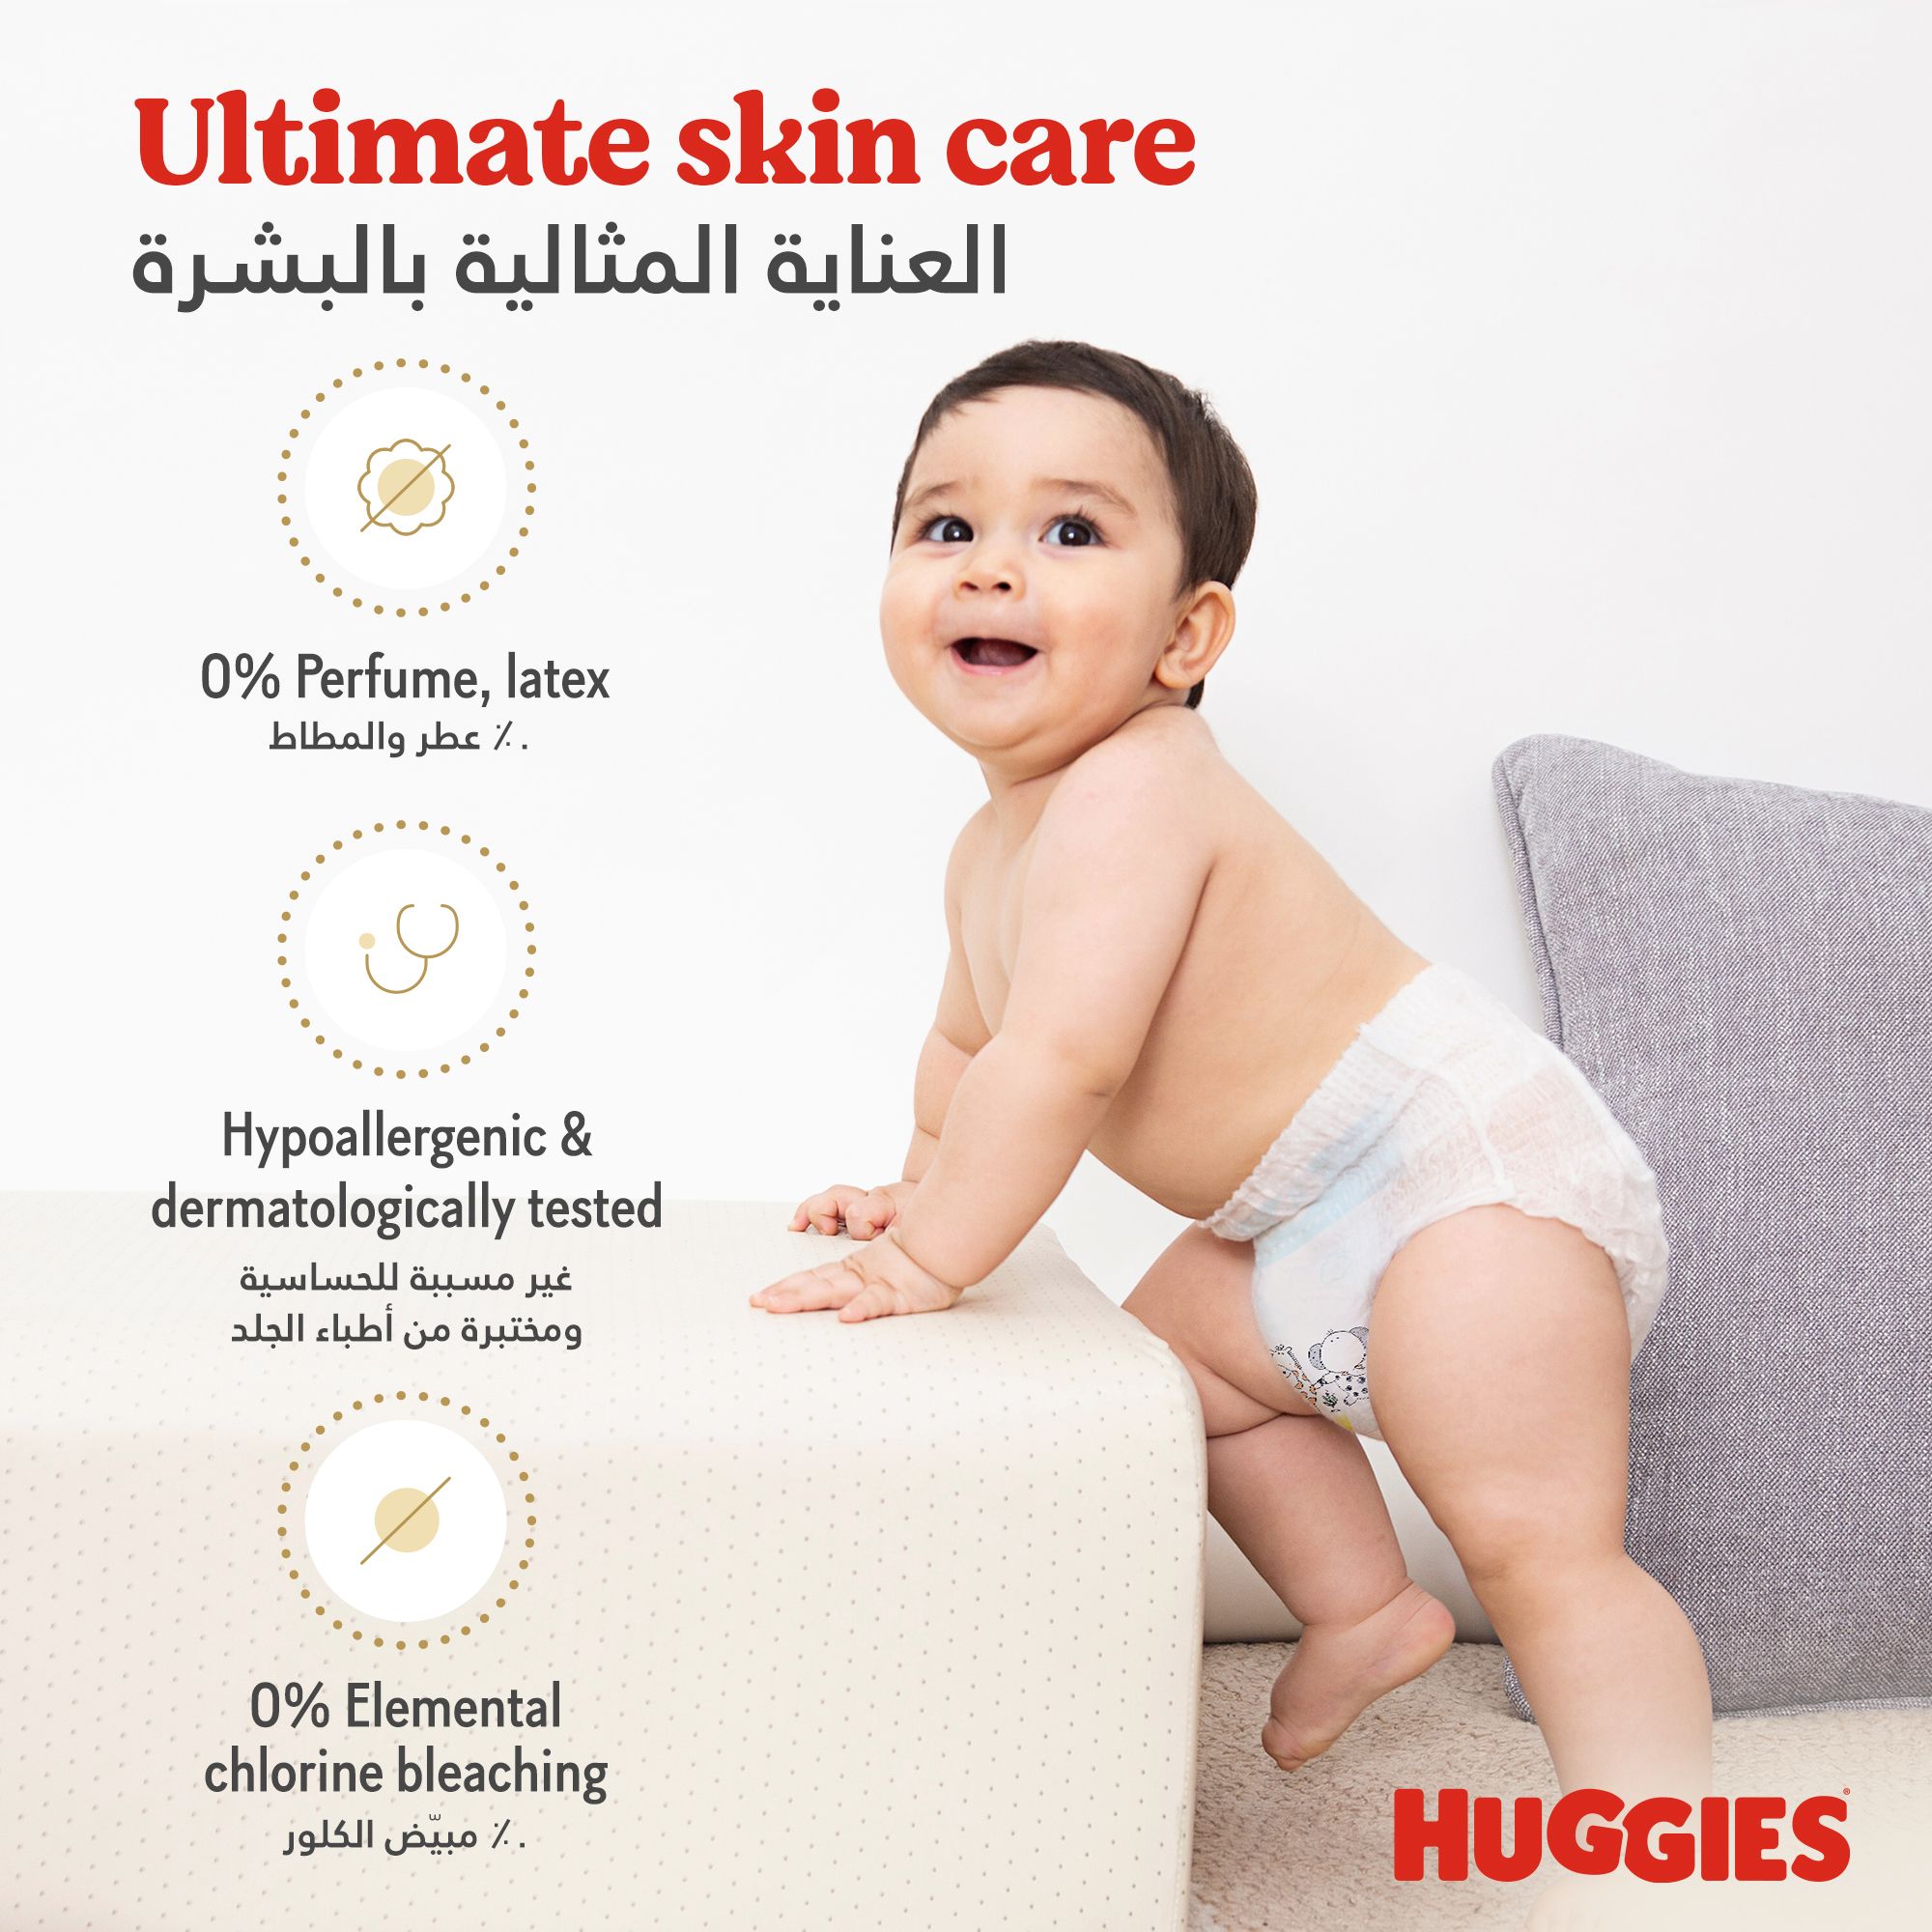 Huggies, Extra Care Culottes, Size 3, 6 - 11 kg, Jumbo Pack, 58 Diaper Pants